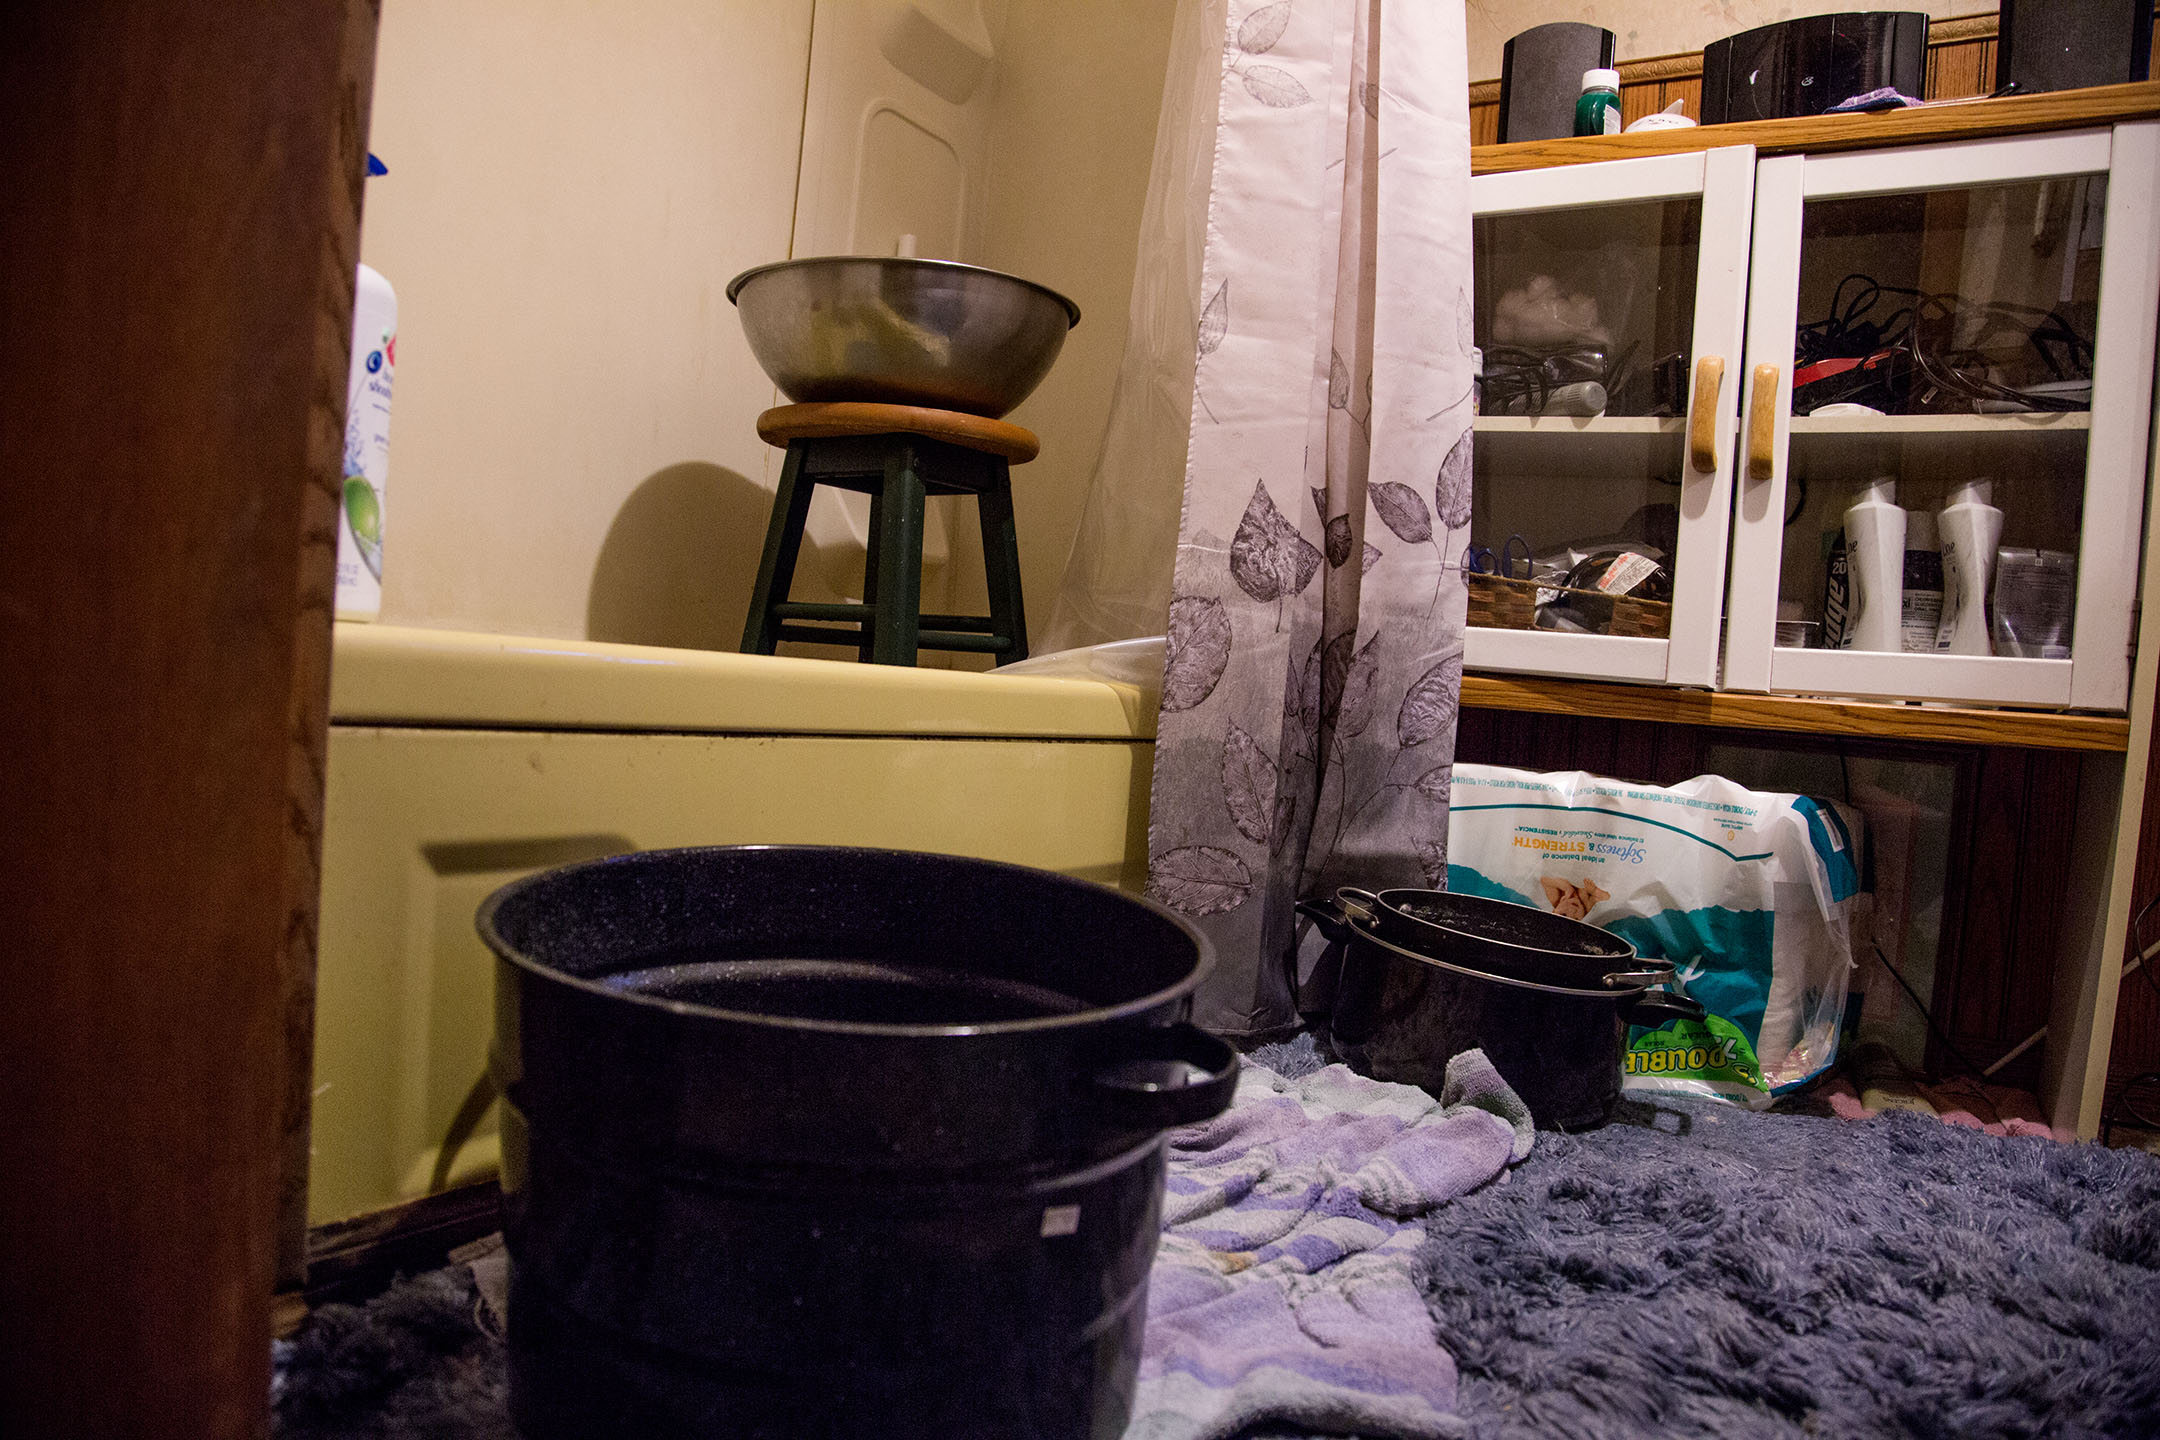 Leana Wright boils a large pot of water and carries it to her bathroom every evening to bathe. She then mixes the boiled water with a pot of cooler water to get the right temperature. The bowl placed on top of the stool is strictly for rinsing. “It’s just like a shower,” Wright said.